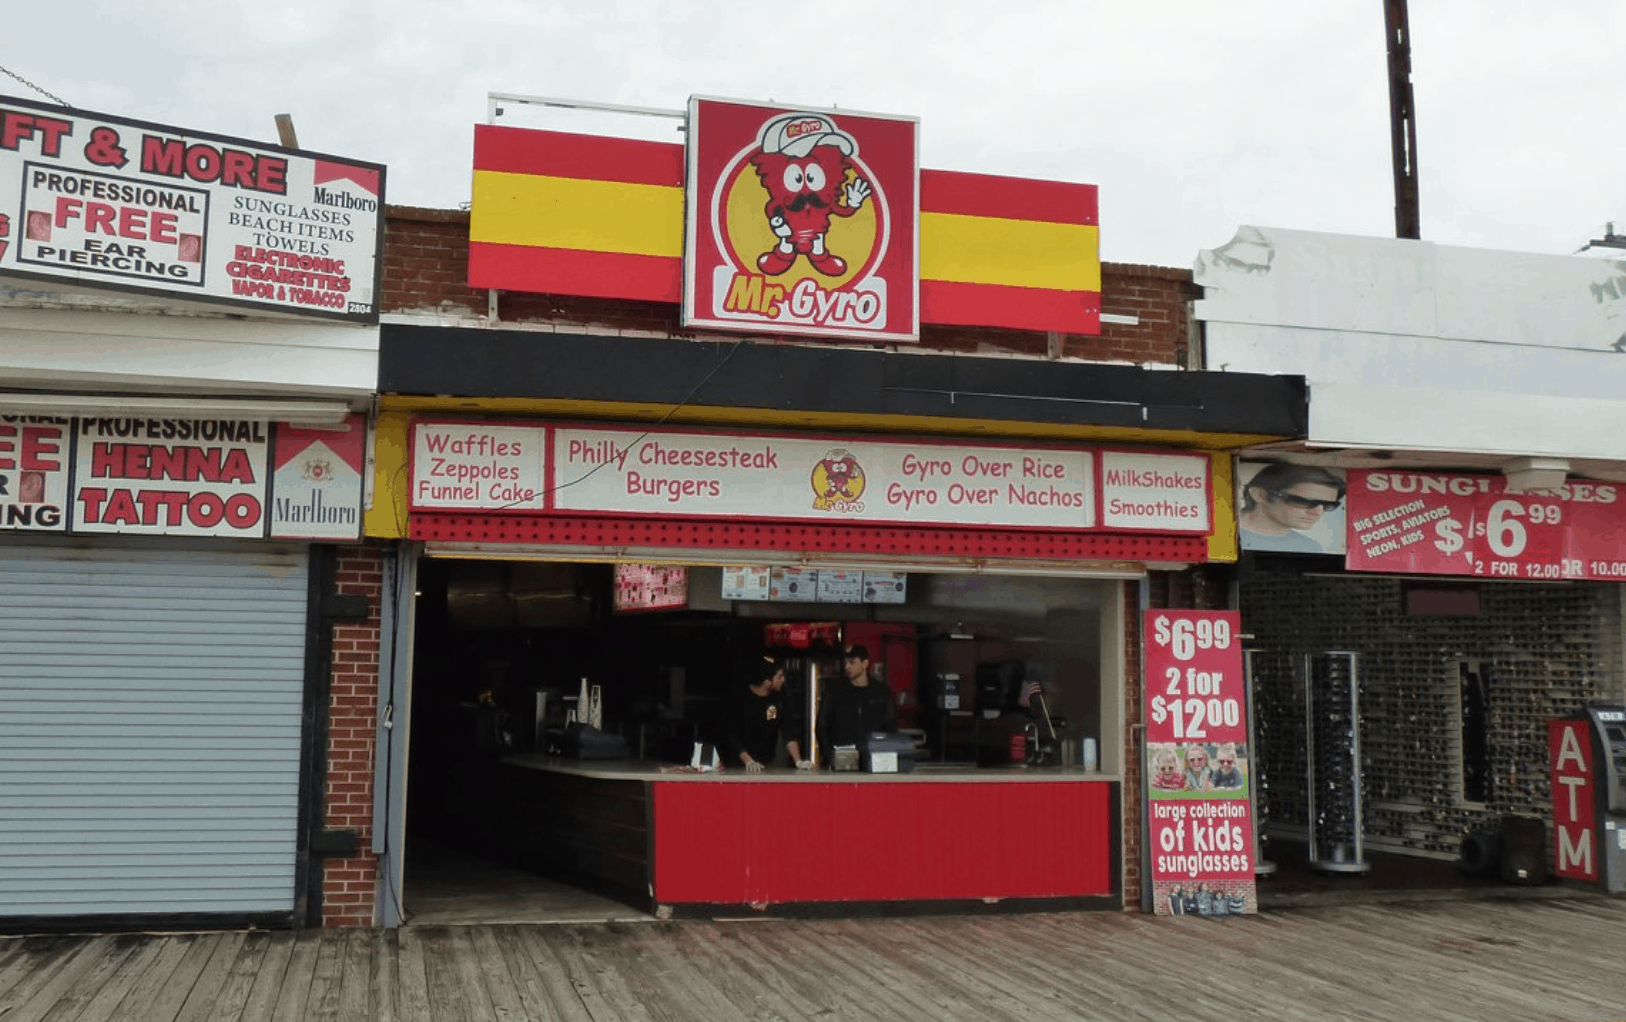 Please Welcome Mr. Gyro to The Wildwood Boardwalk!